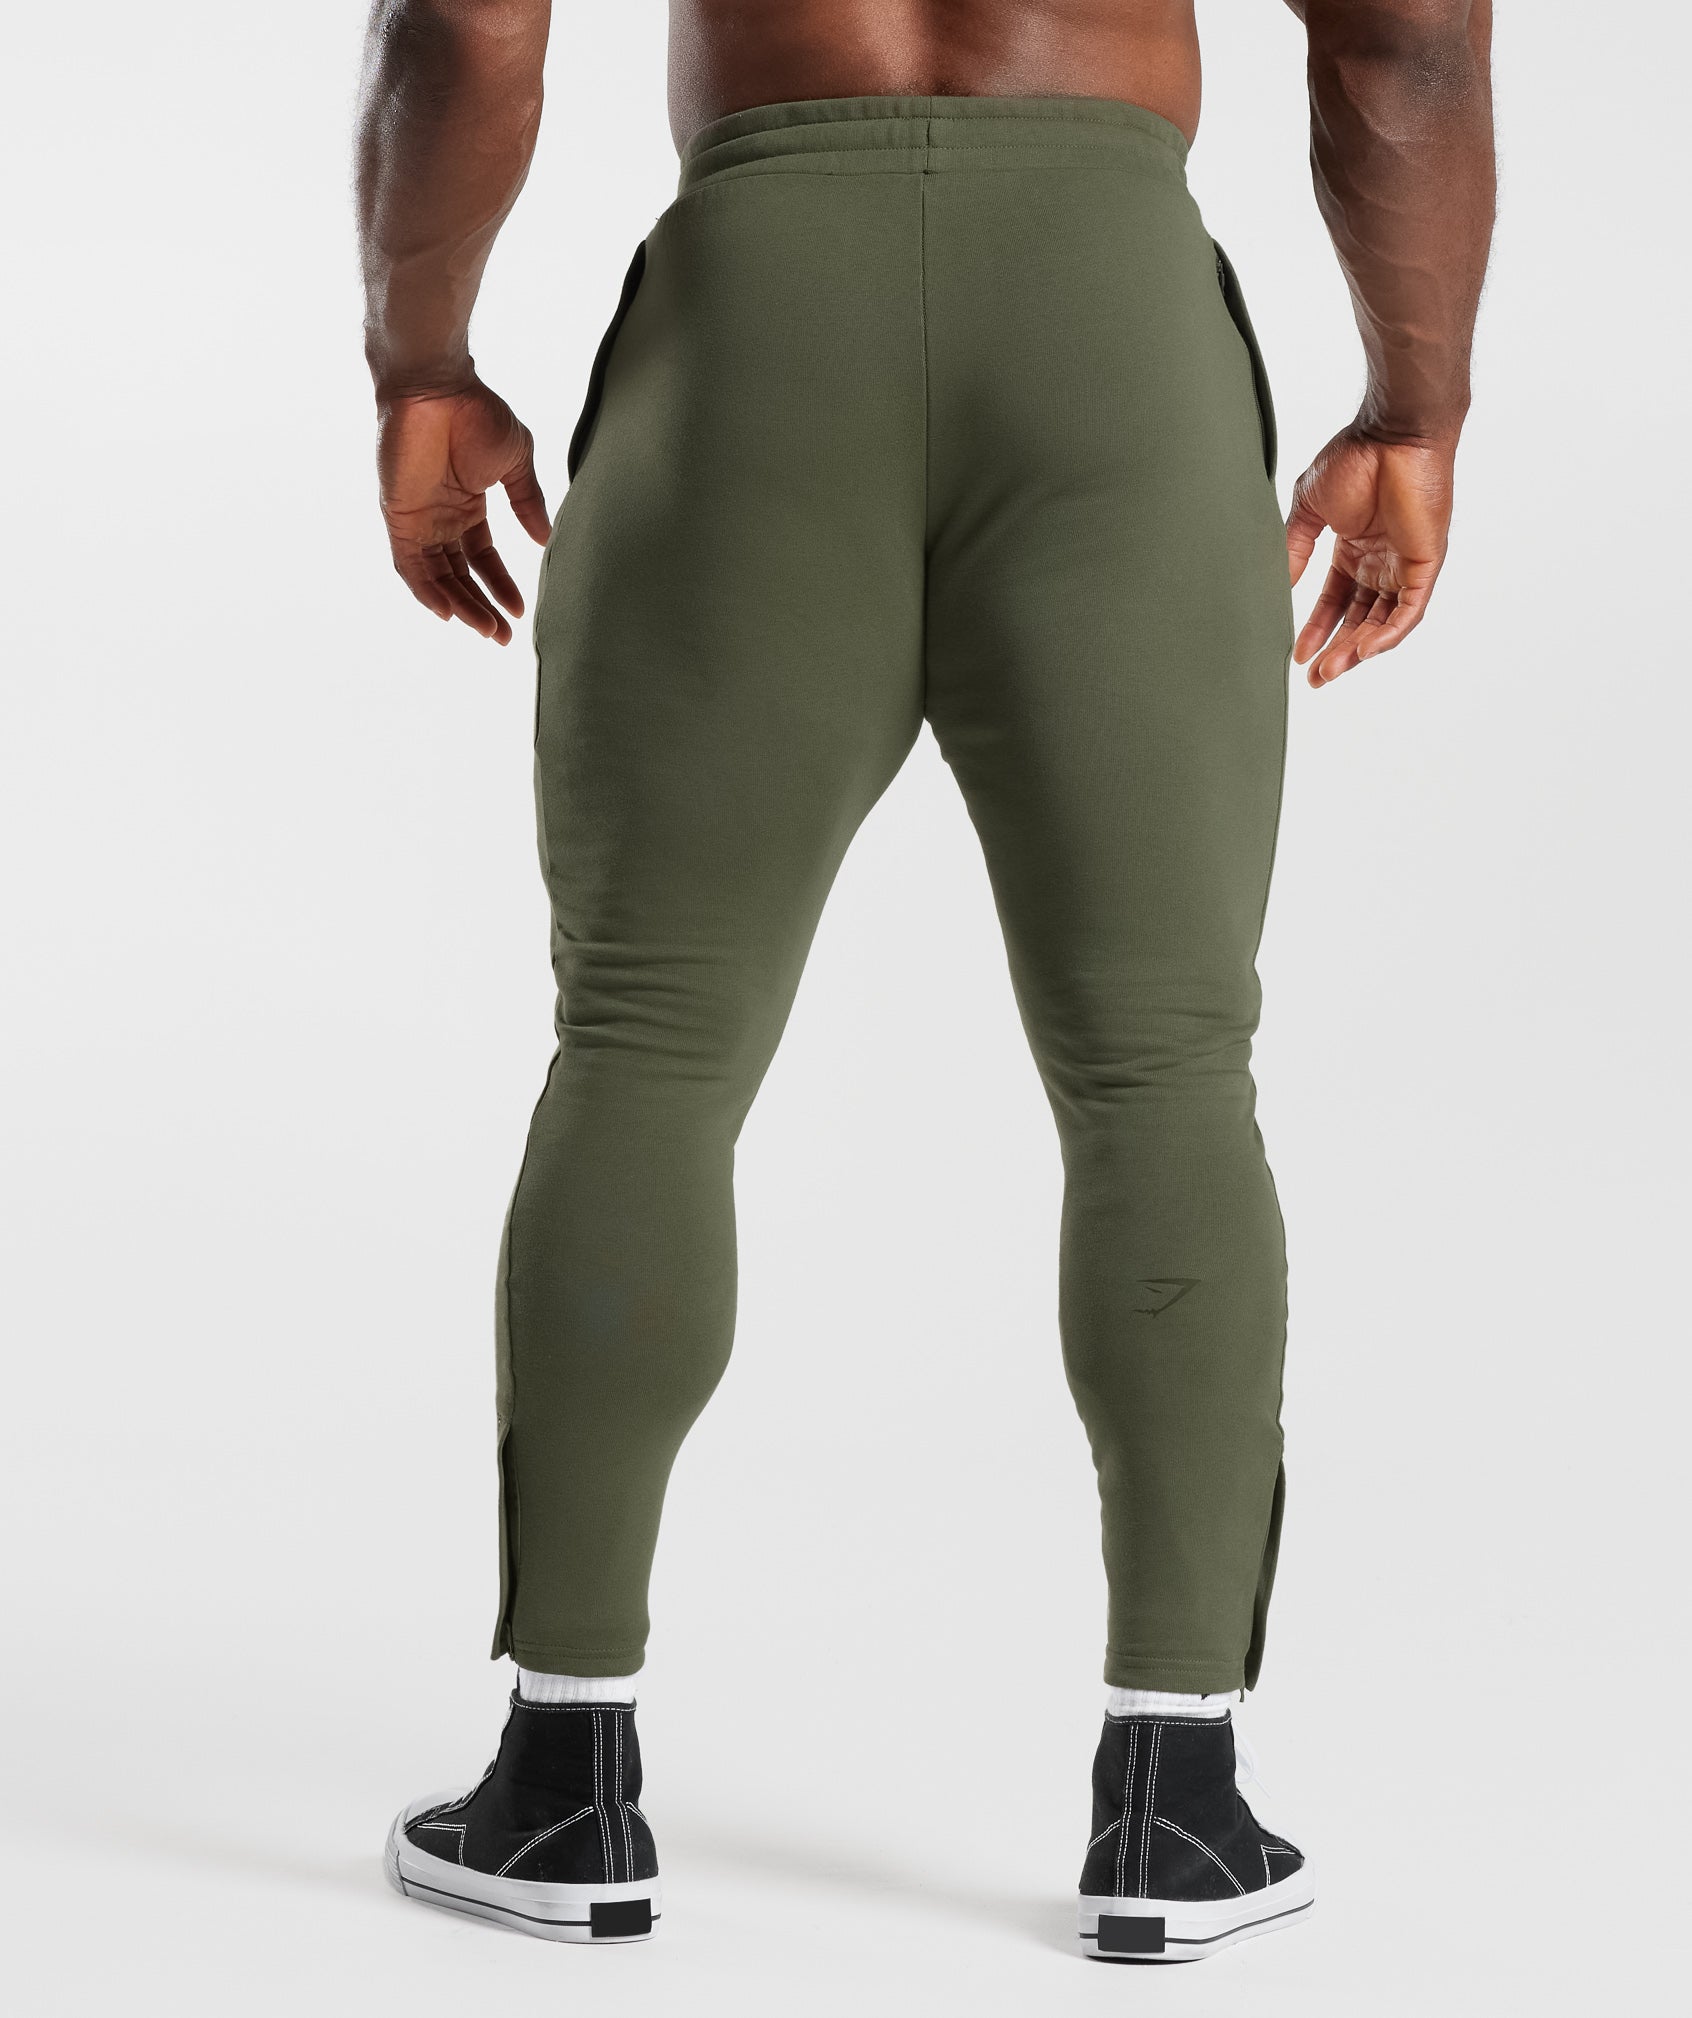 Apollo Muscle Fit Joggers